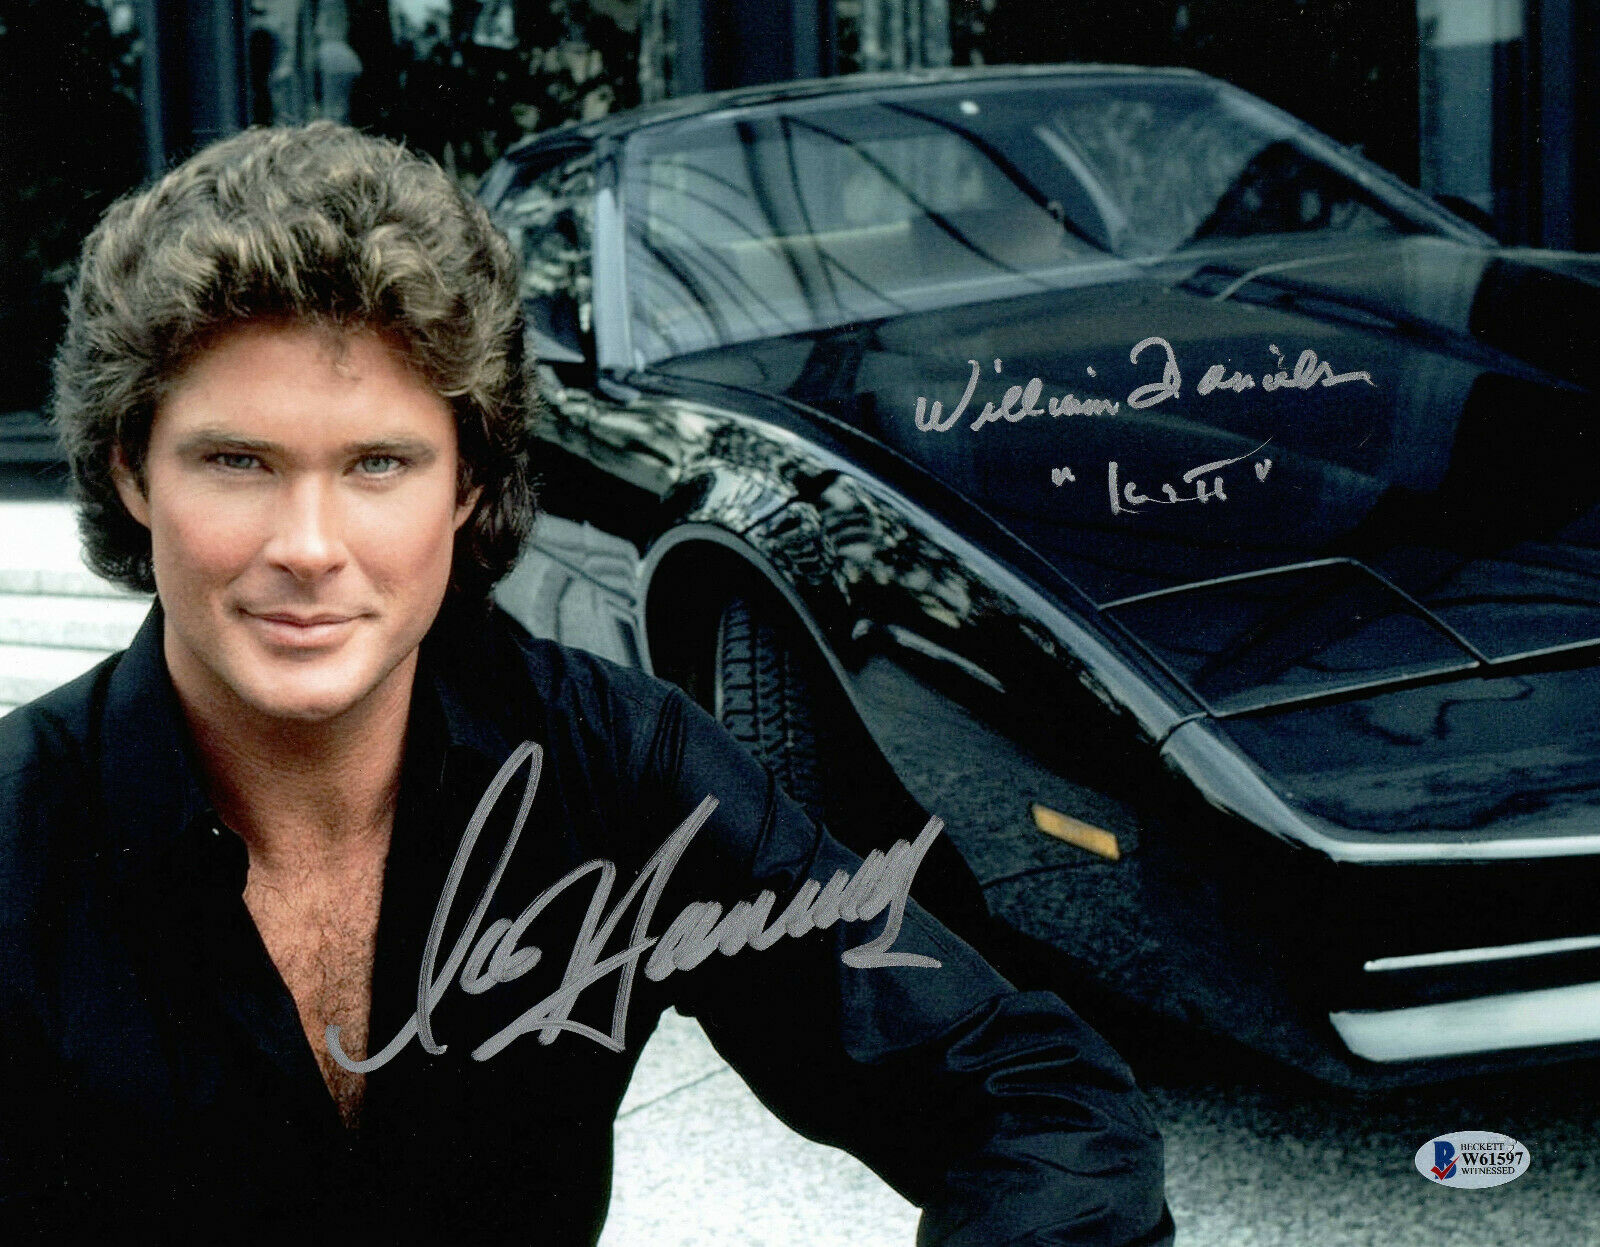 KNIGHT RIDER AUTOGRAPH SIGNED PP PHOTO POSTER DAVID HASSELHOFF 